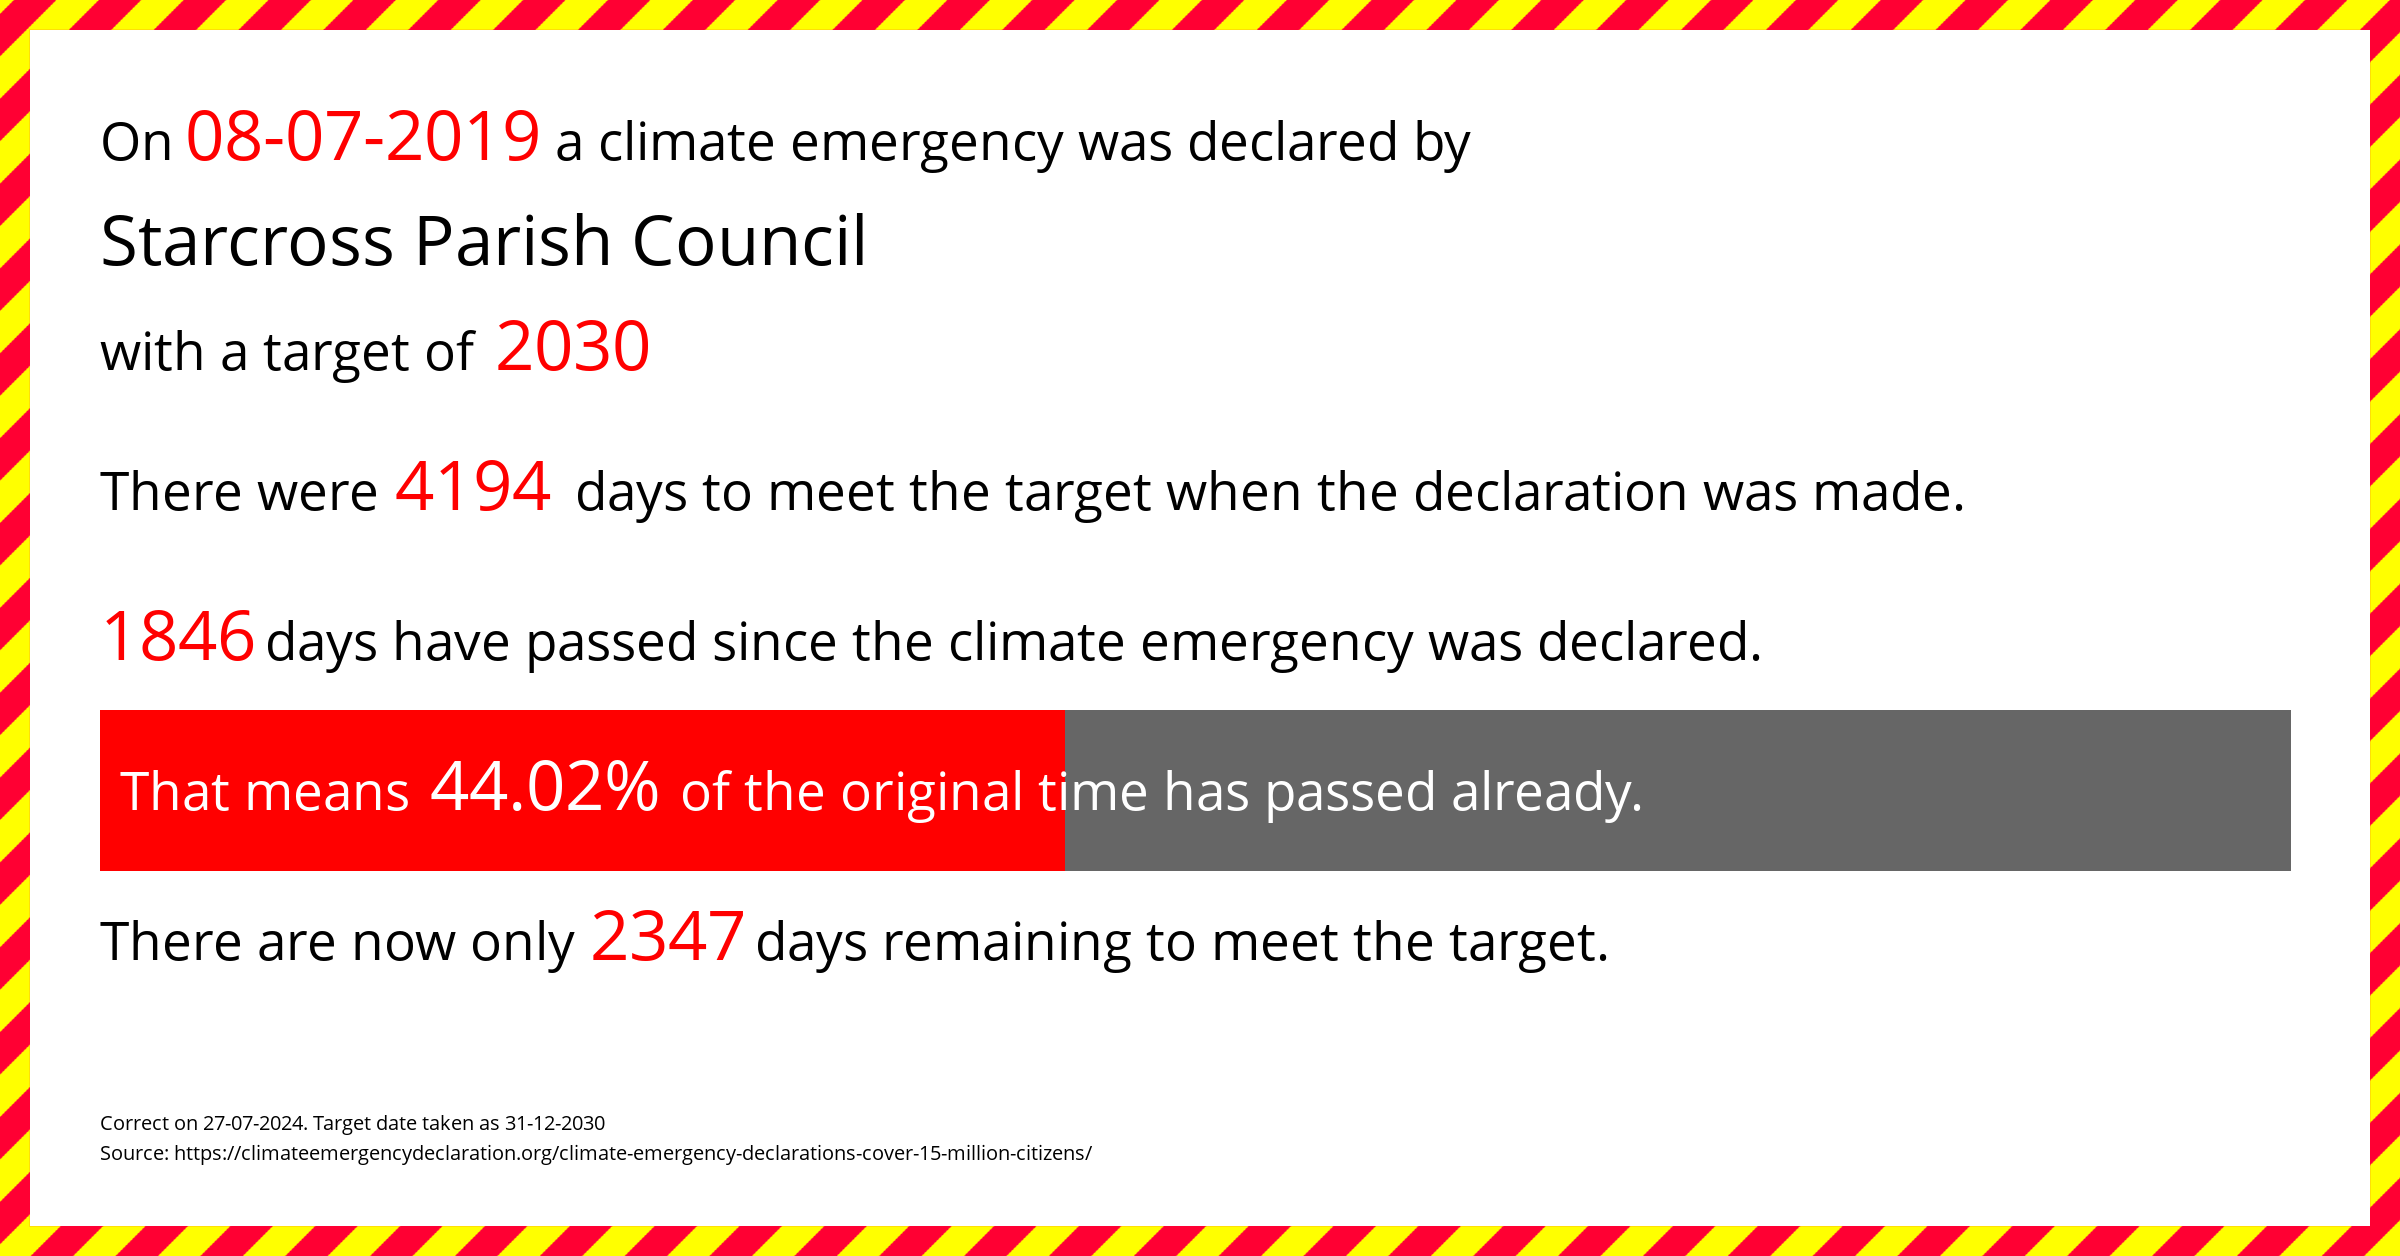 Starcross Parish Council declared a Climate emergency on Monday 8th July 2019, with a target of 2030.